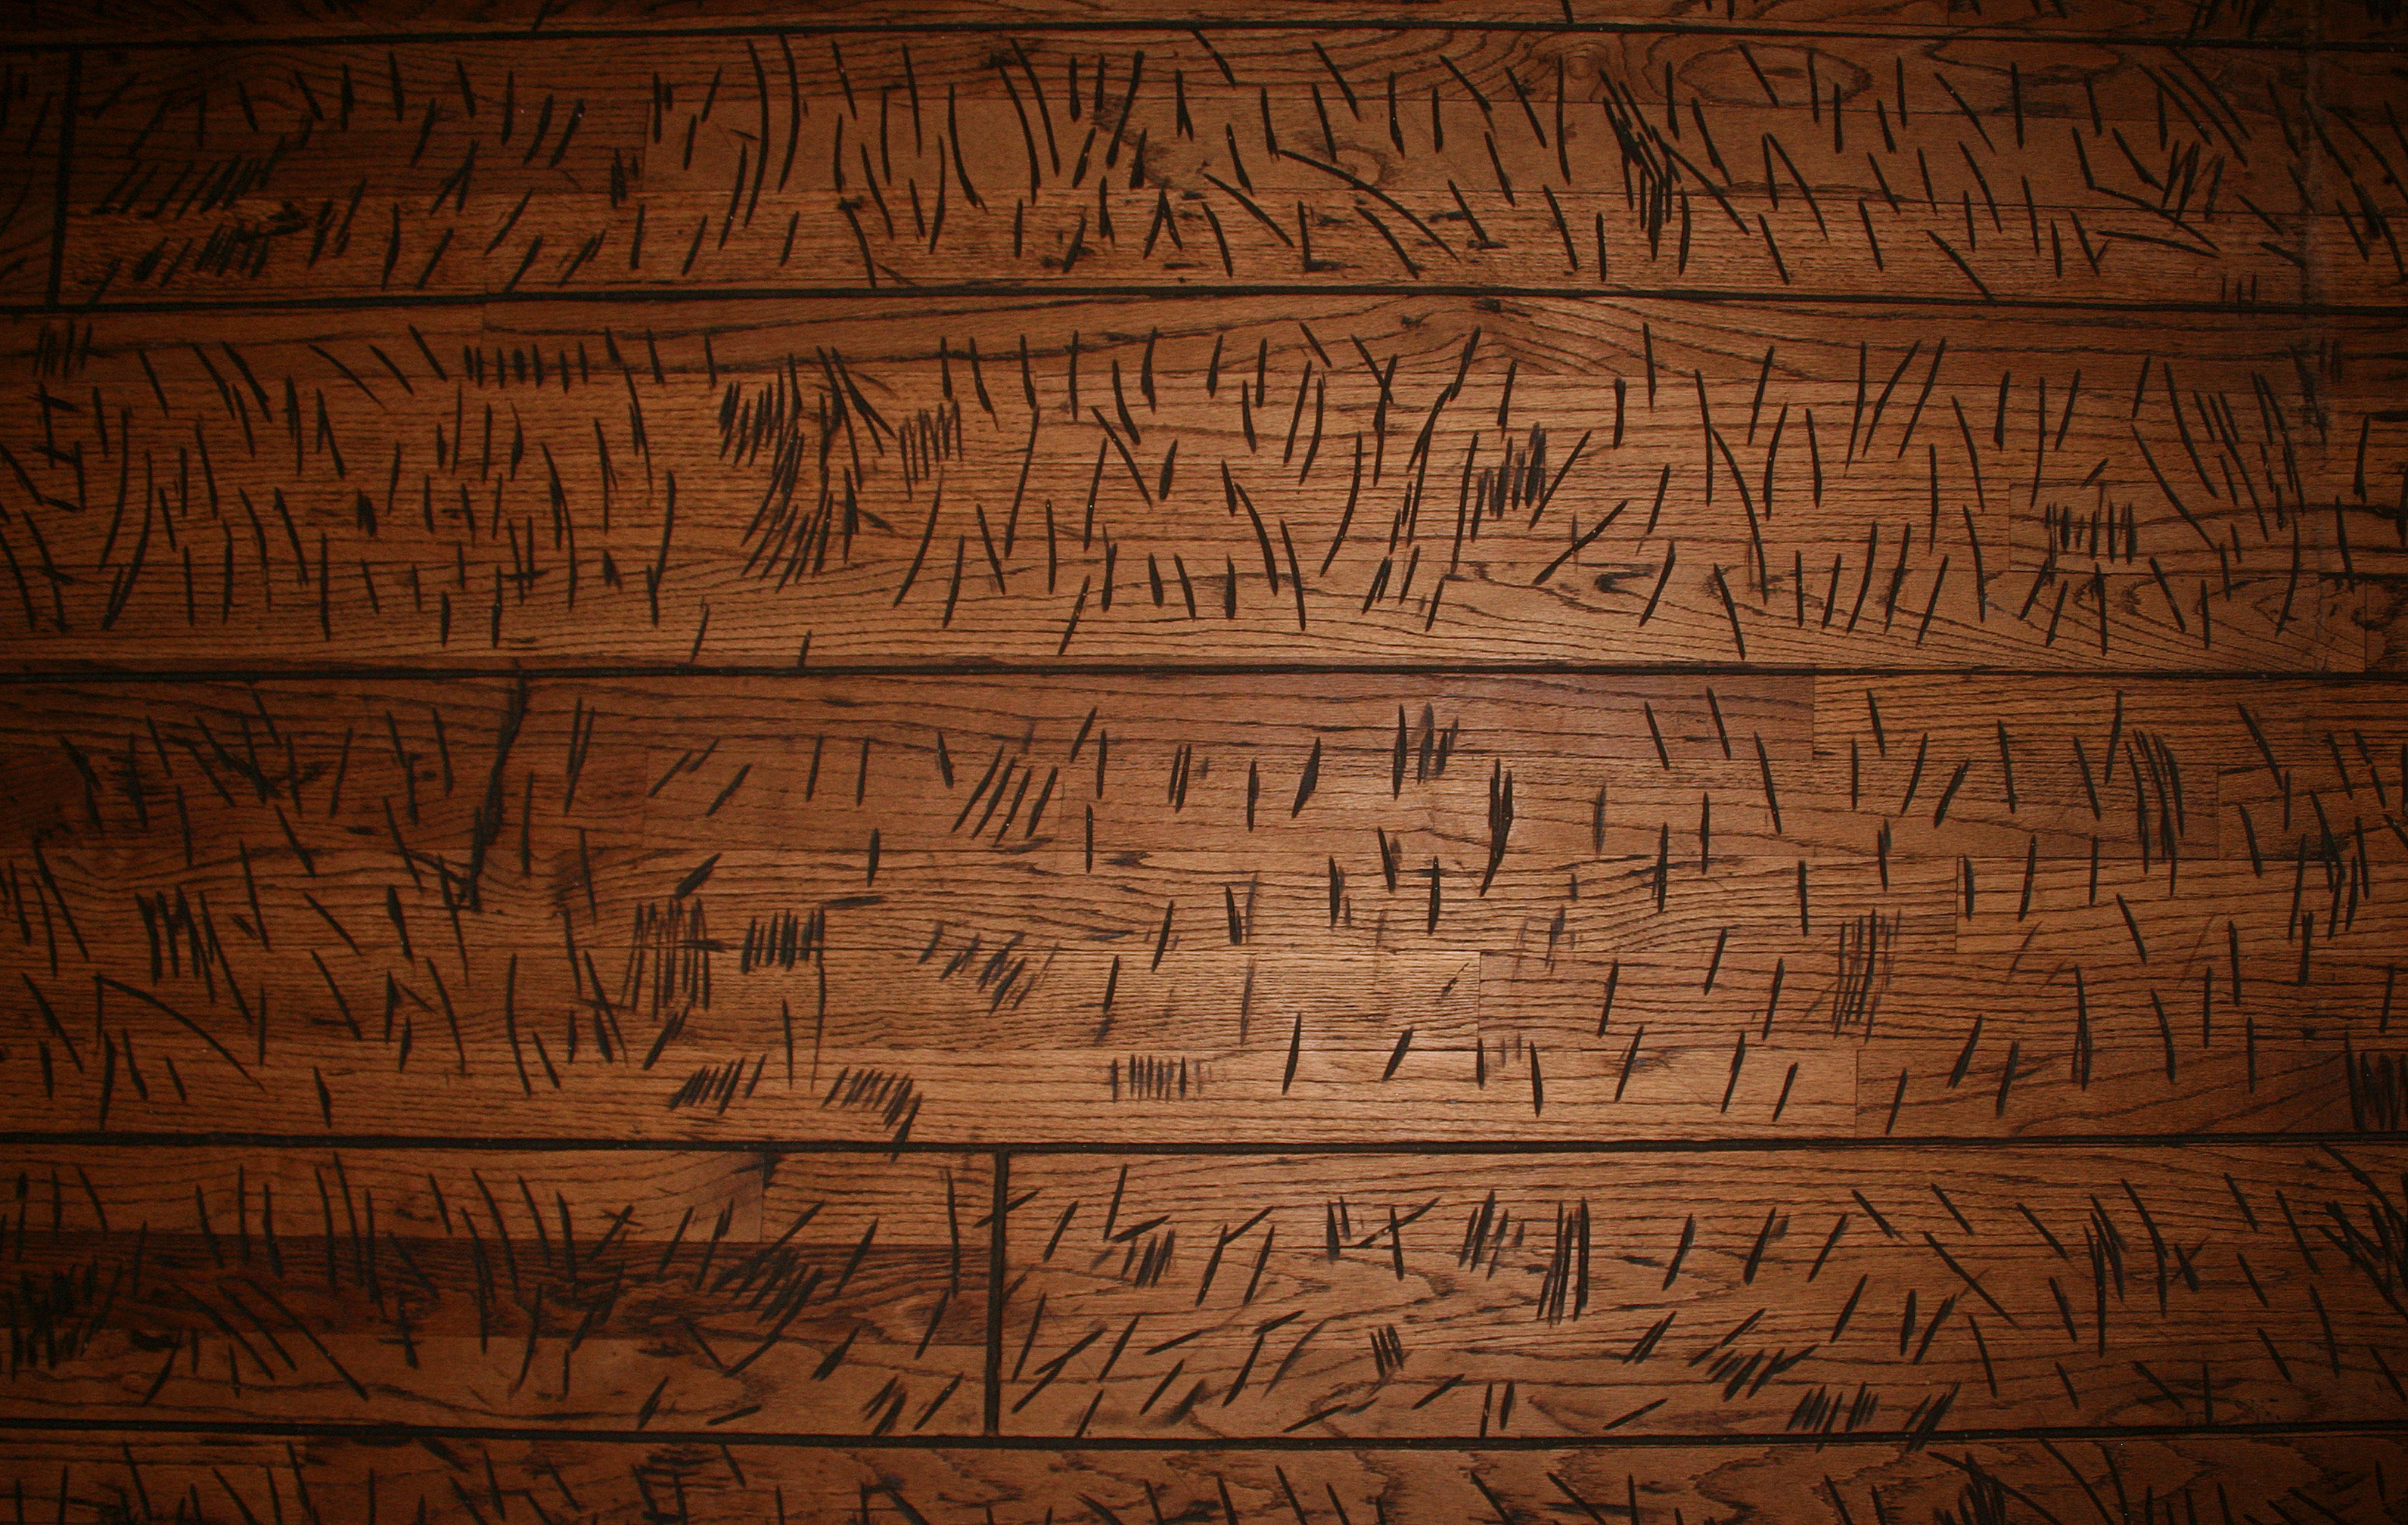 Wood Textures Archives - Page 4 of 10 - TextureX- Free and premium ...